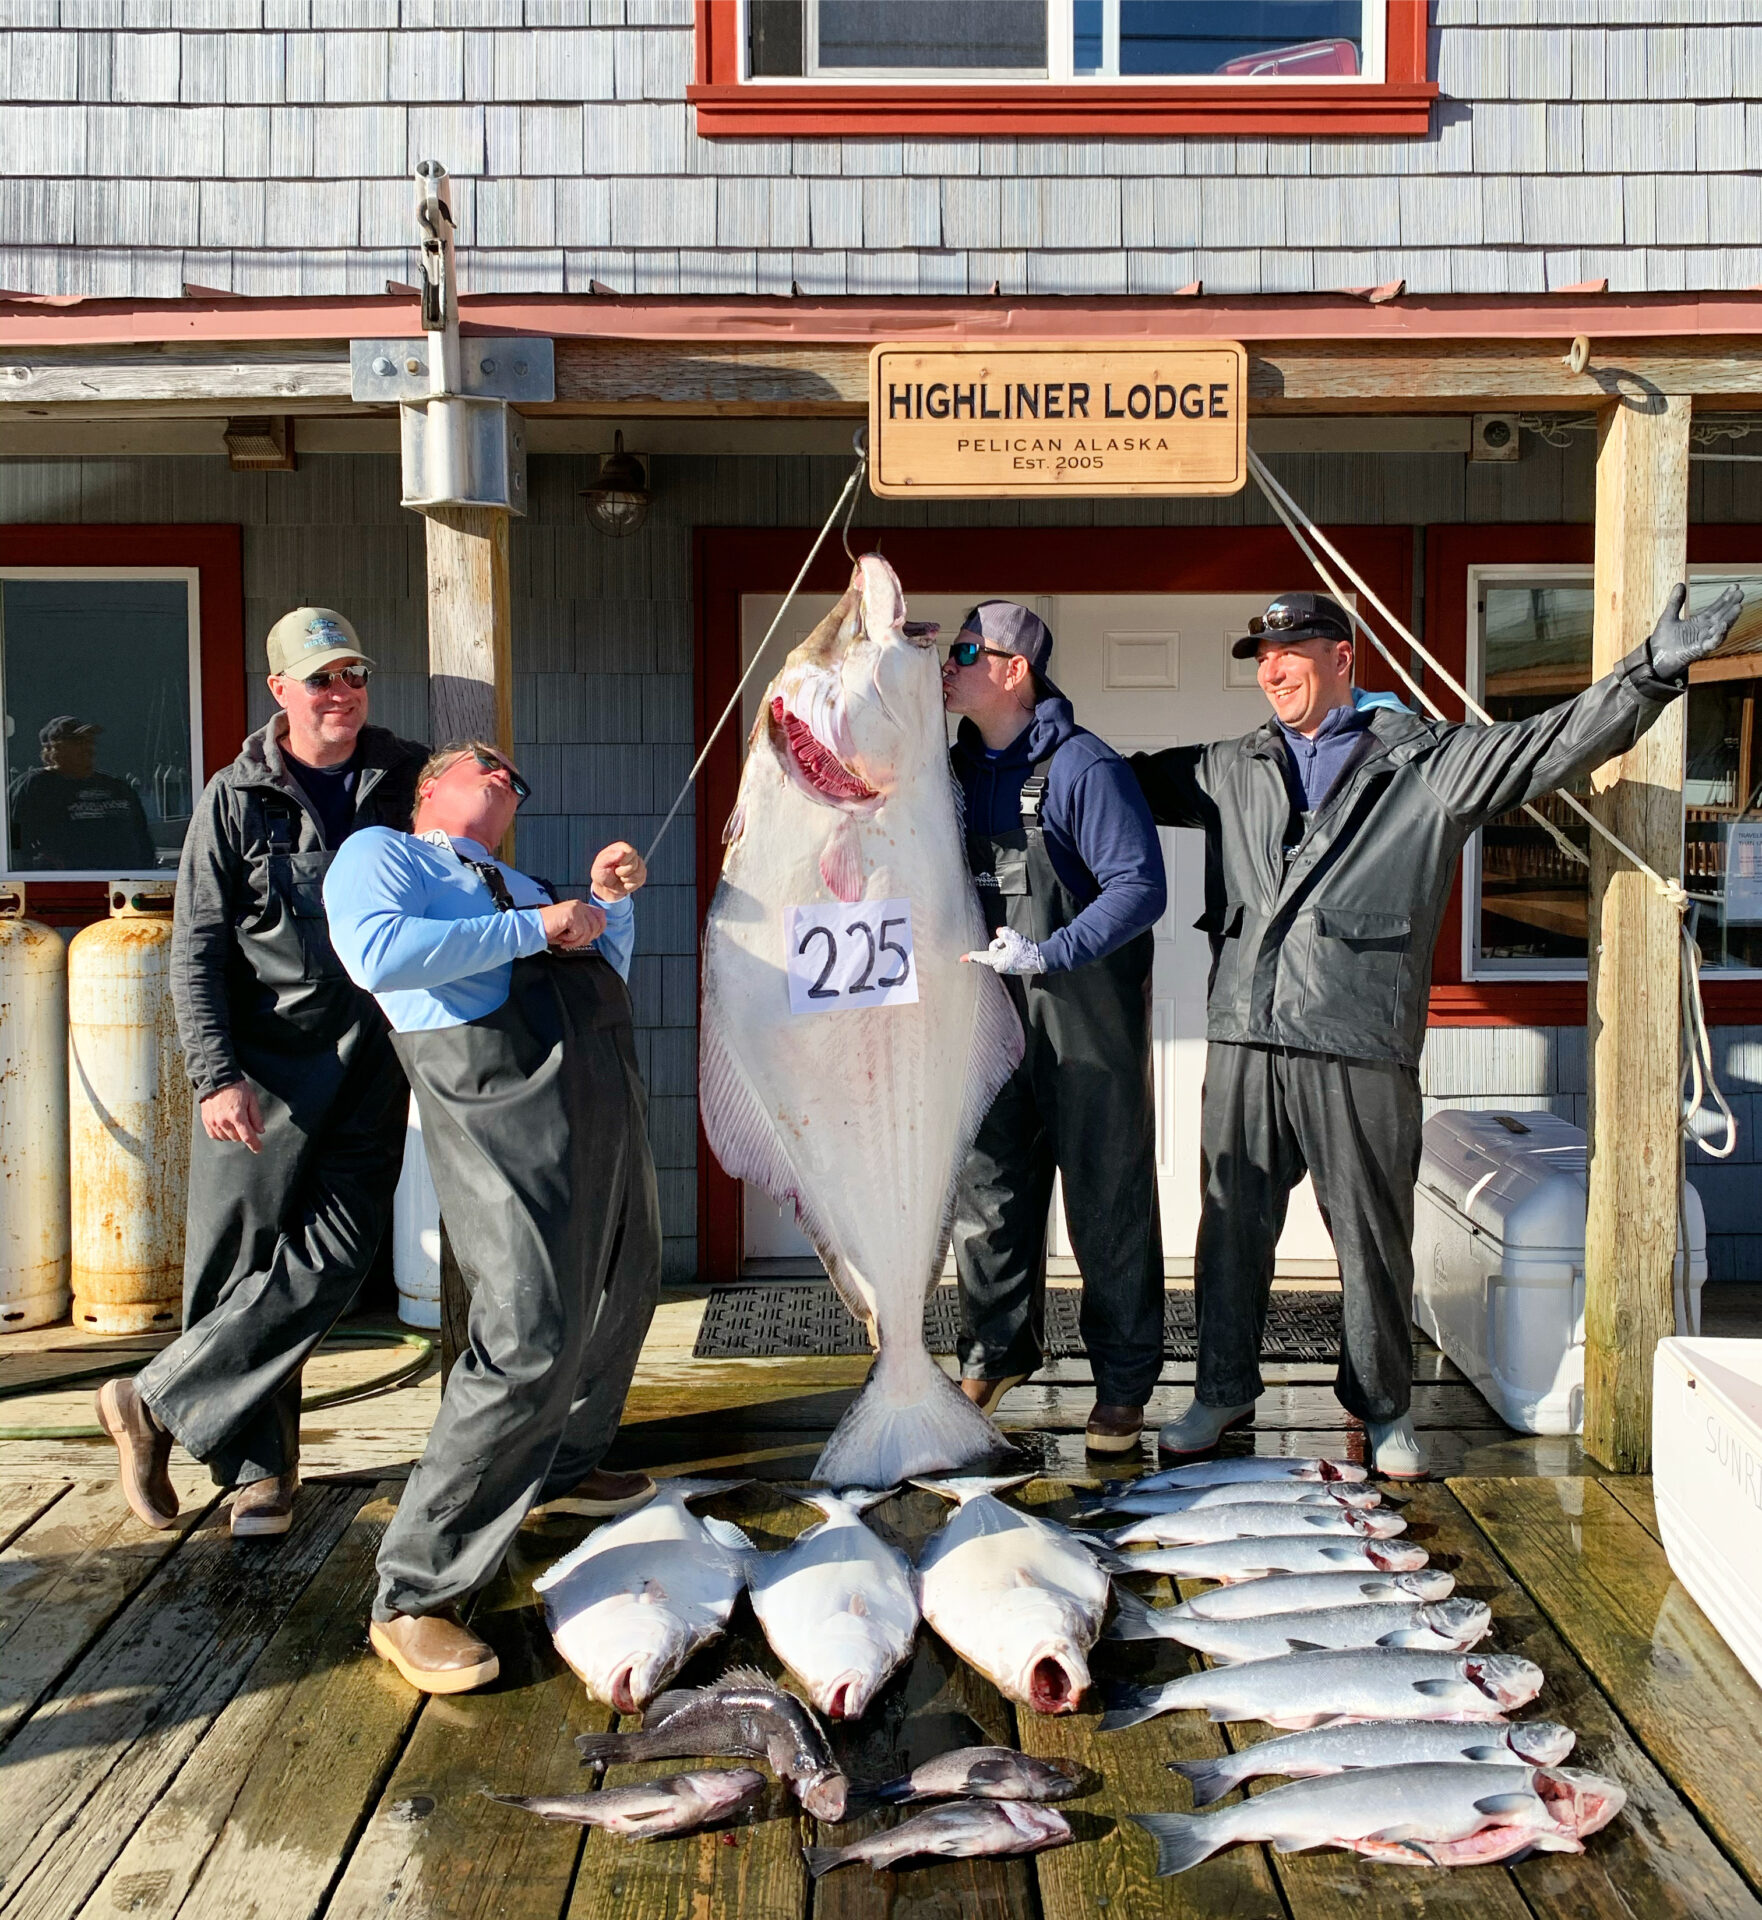 A group of men standing next to fish on the dock.